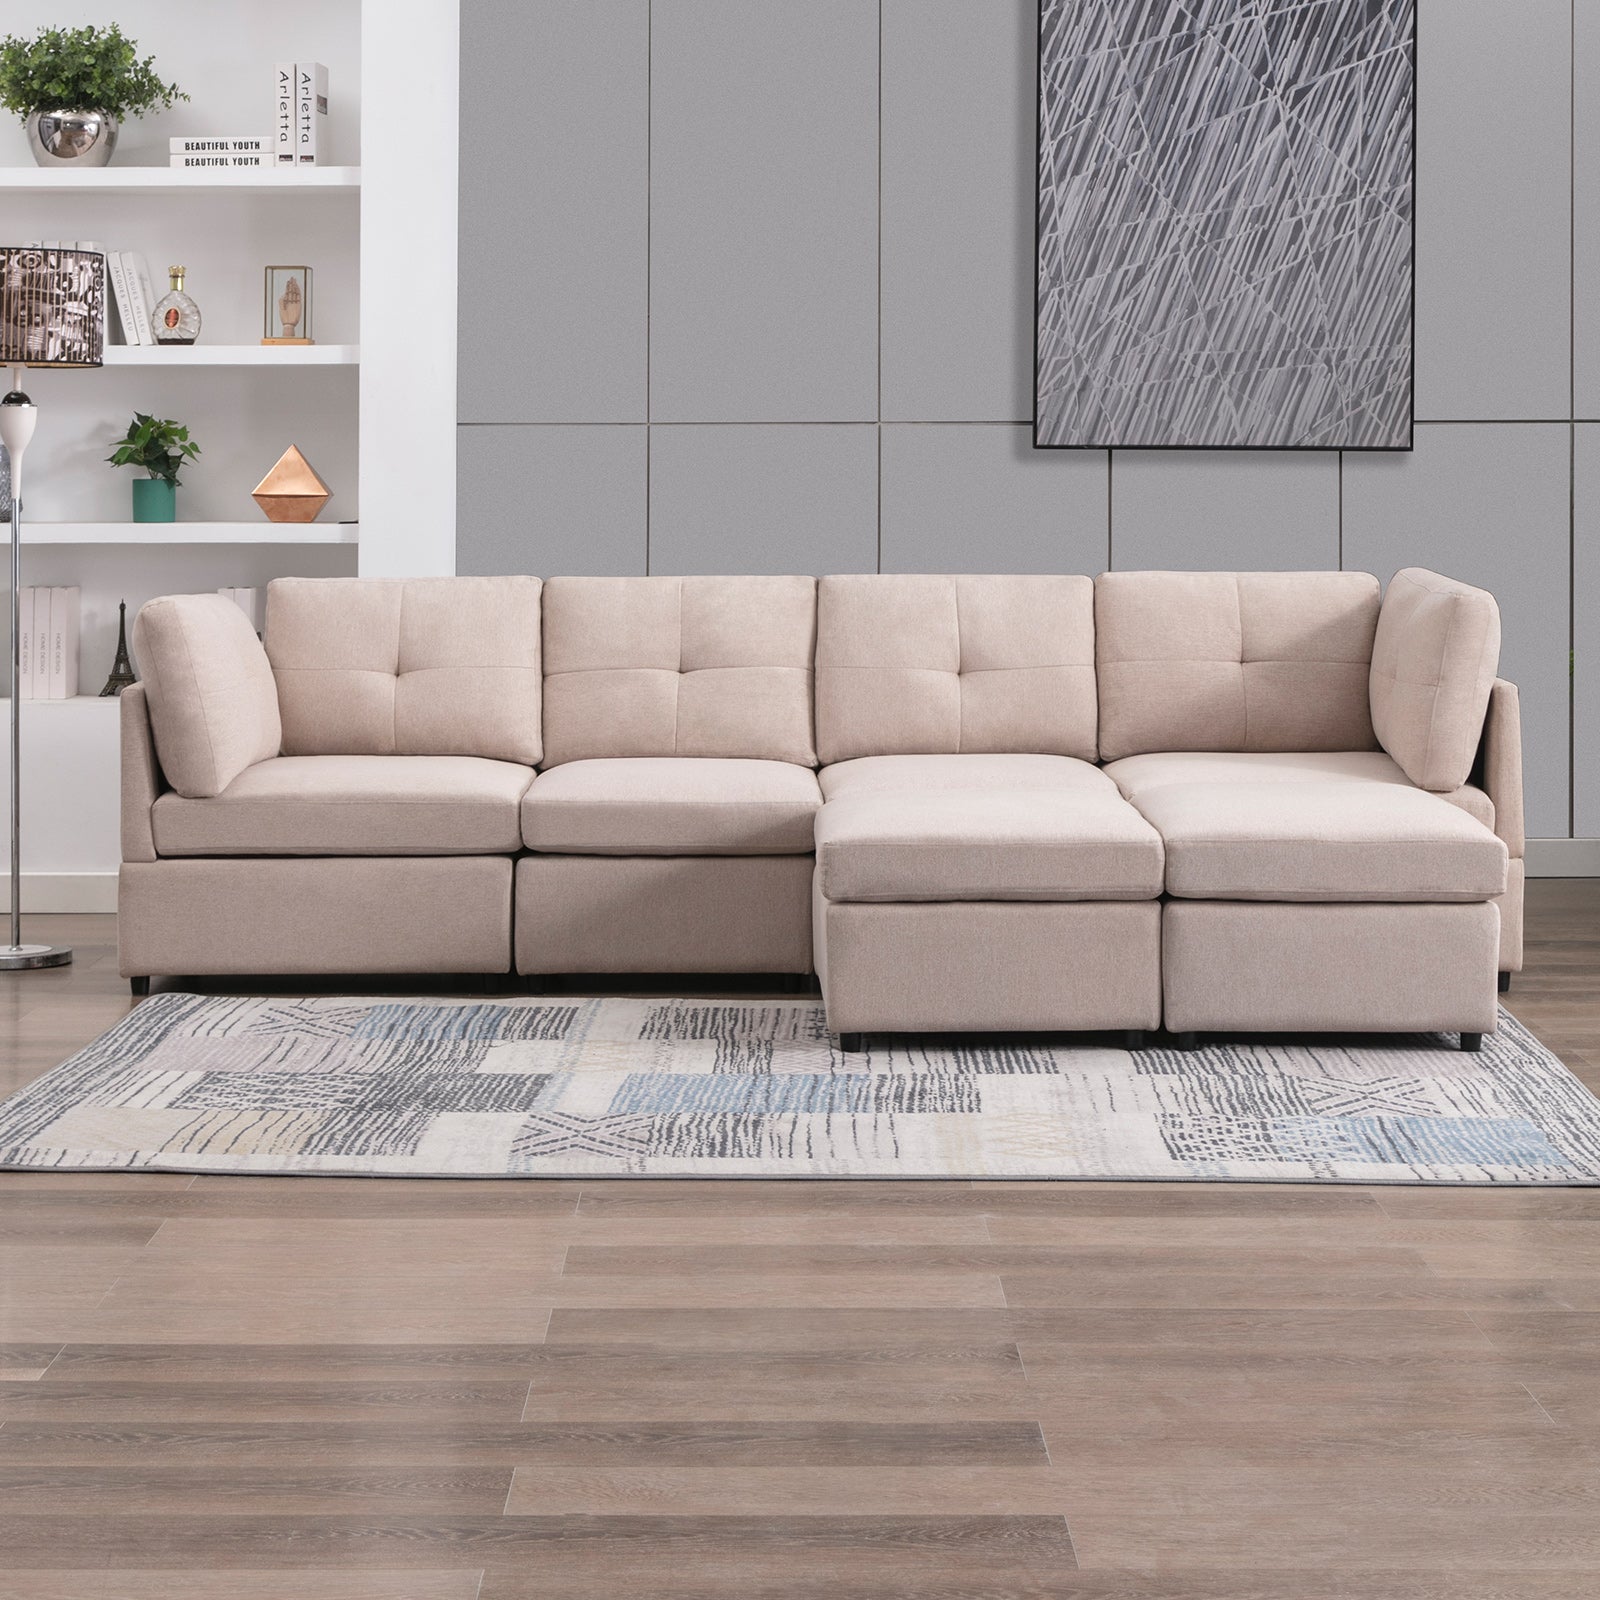 Cecer L/U Shaped Convertible Sectional Sofa Couch with Ottoman